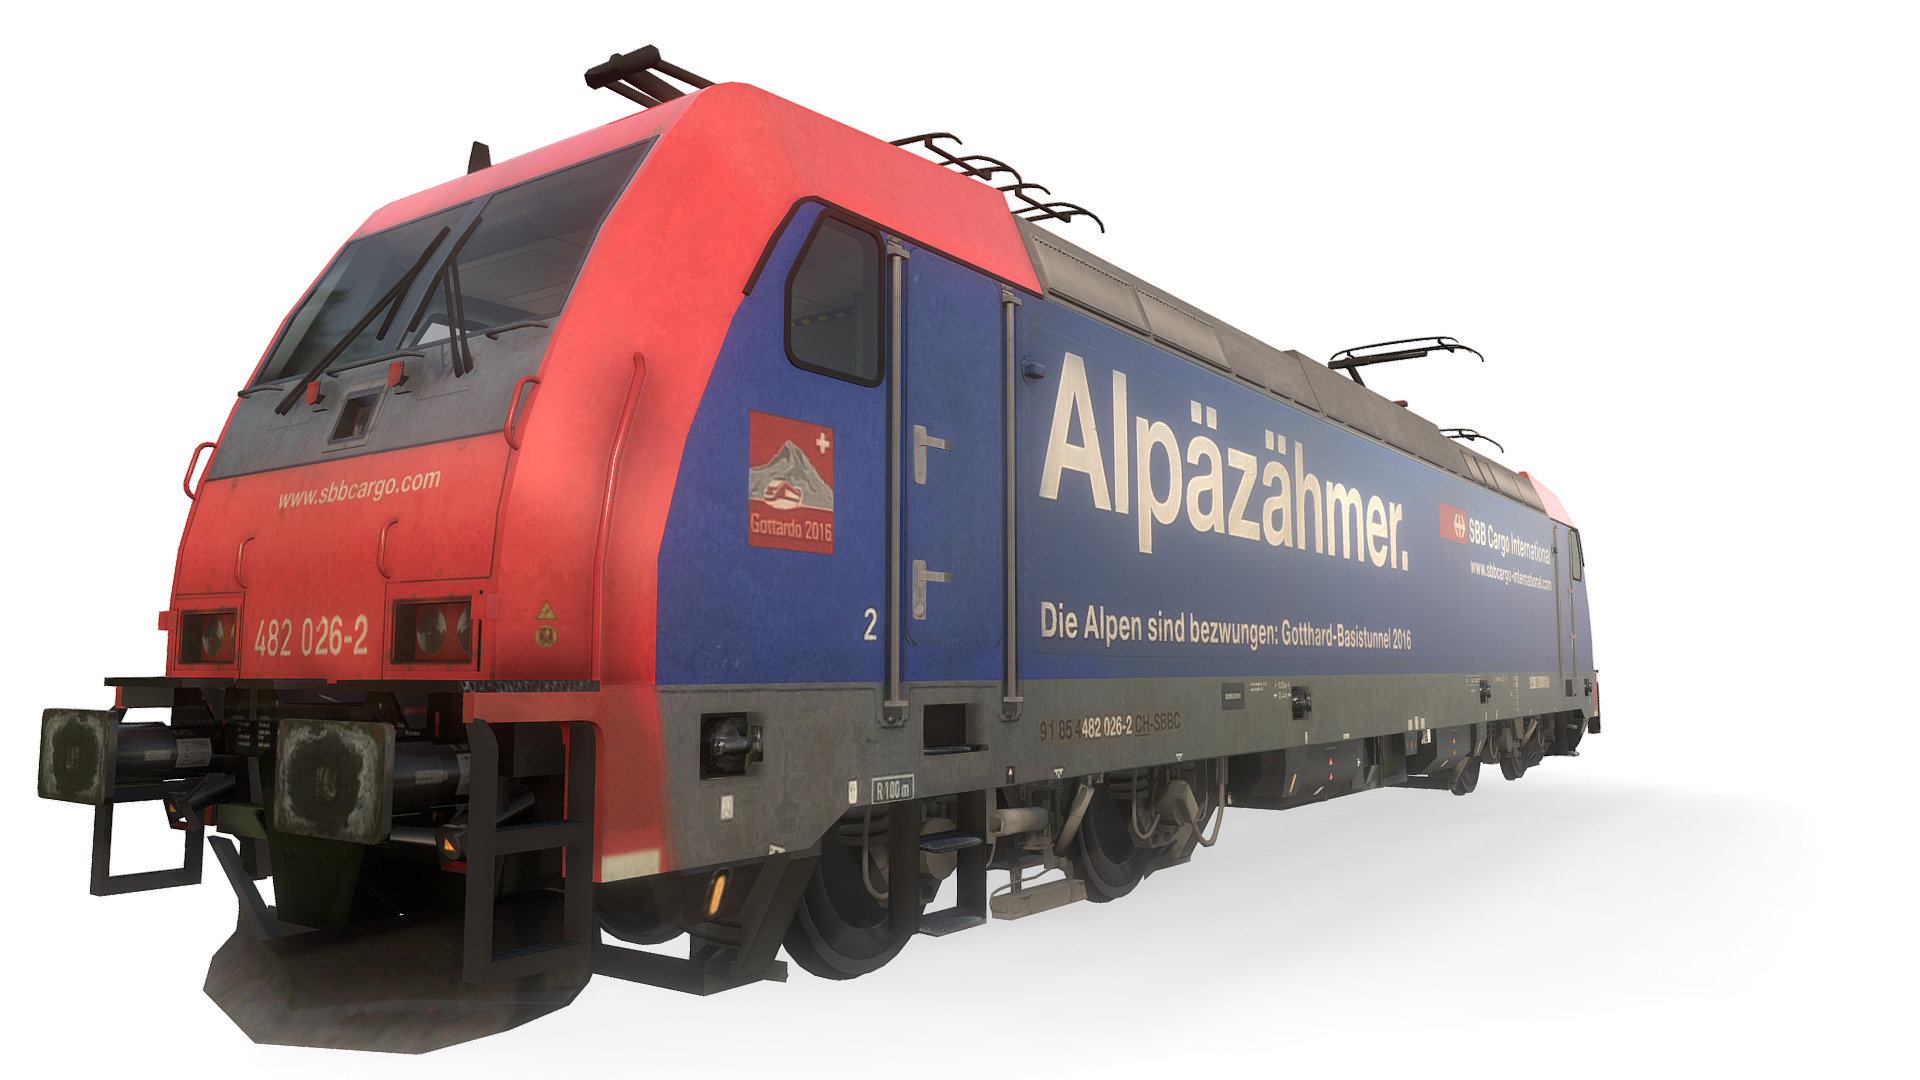 3D model Locomotive Class 185 – RE482 026-2 – SBB - This is a 3D model of the Locomotive Class 185 - RE482 026-2 - SBB. The 3D model is about a blue train on a track.